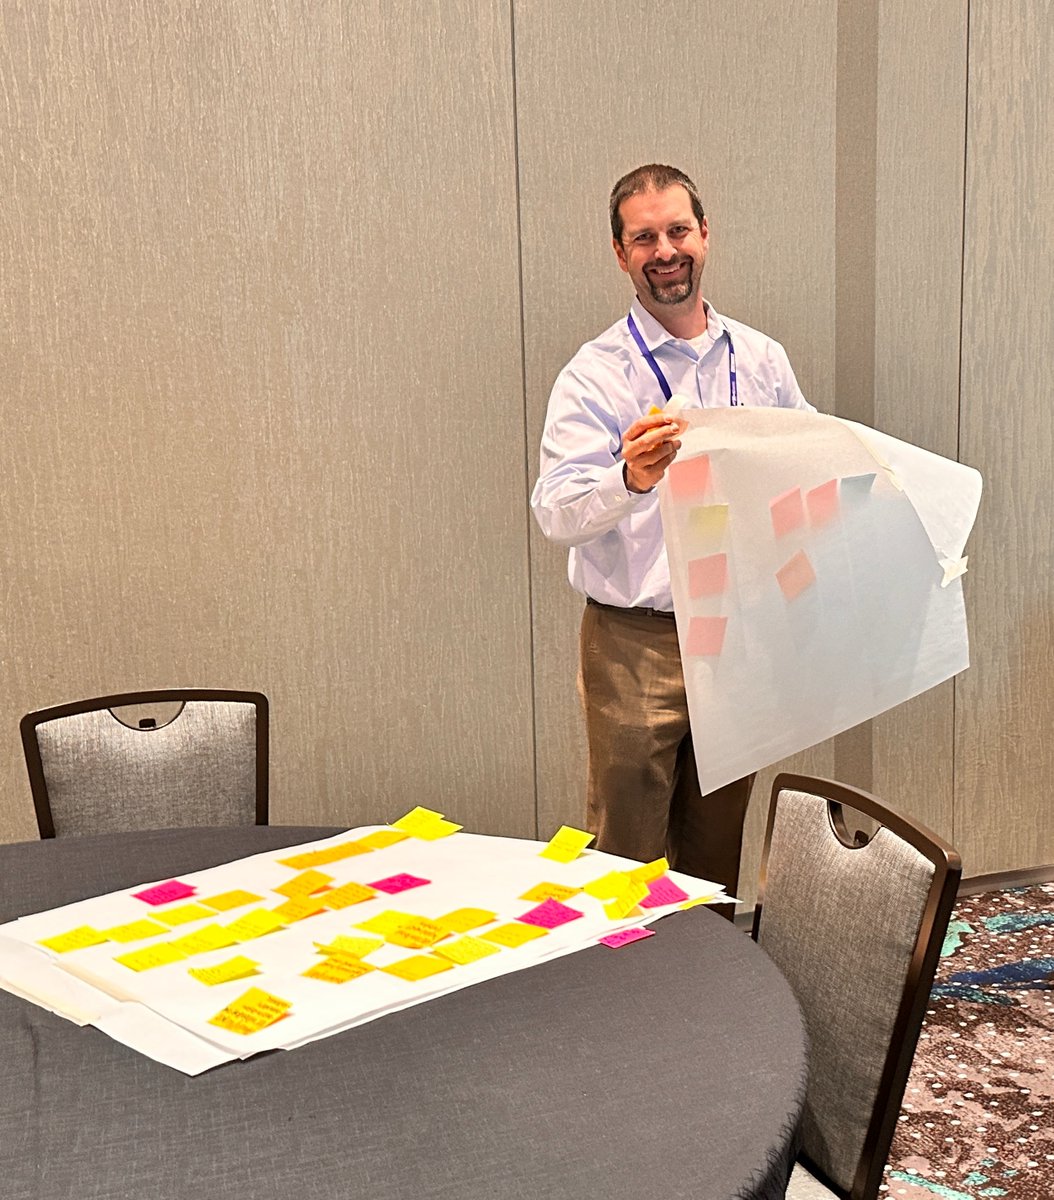 Thanks to everyone who attended our  #highperformingteams & #storytelling workshops at last week's #NAISAC conference in #vegas. What a wonderfully inspiring group of leaders. Be in touch if we can help back in your schools info@enrusk.com  #schoolleadership #agile  #school